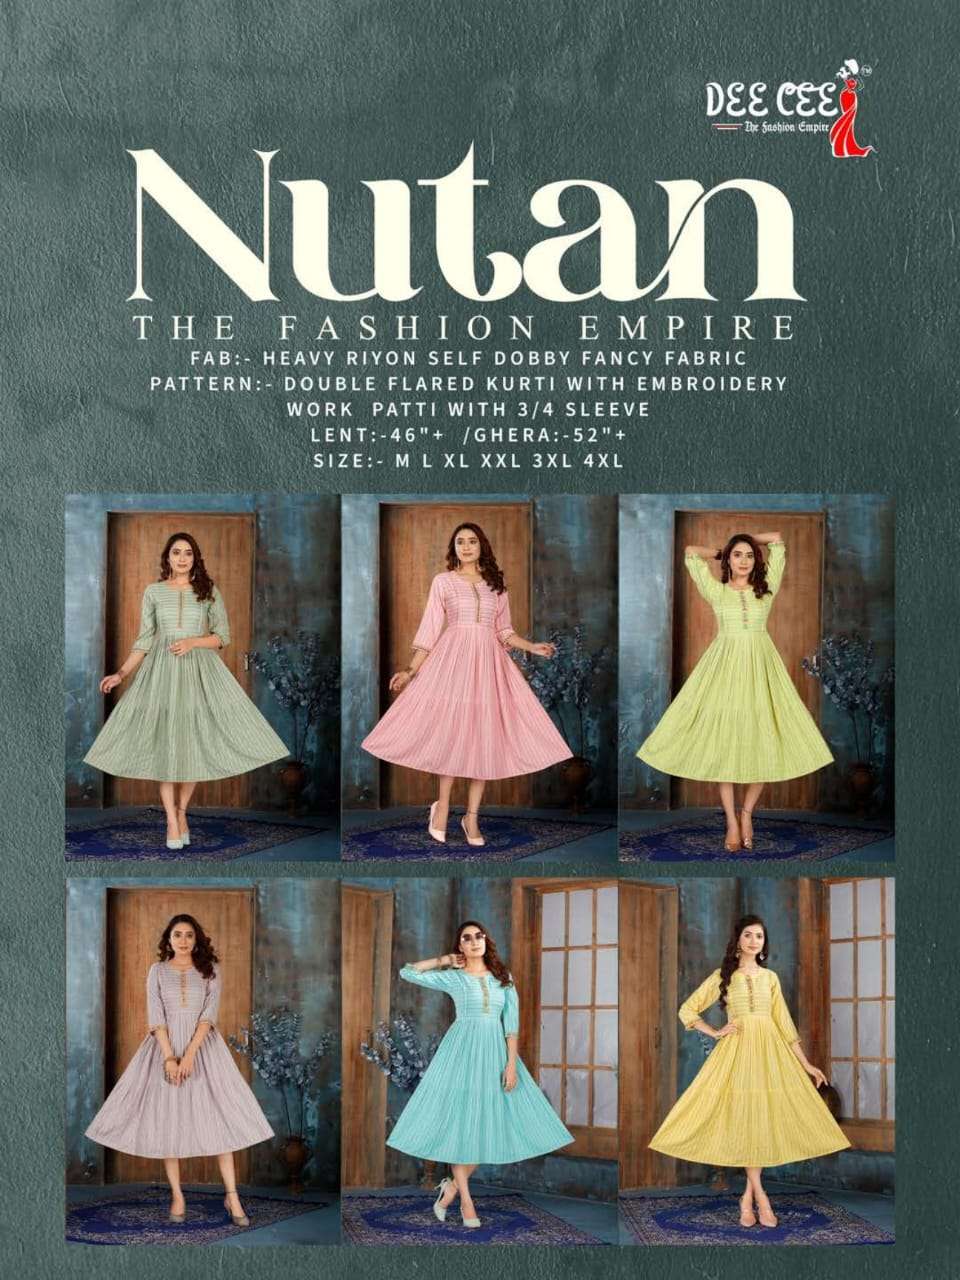 NUTAN BY DEE CEE 1001 TO 1006 SERIES DESIGNER STYLISH FANCY COLORFUL BEAUTIFUL PARTY WEAR & ETHNIC WEAR COLLECTION HEAVY RAYON KURTIS AT WHOLESALE PRICE